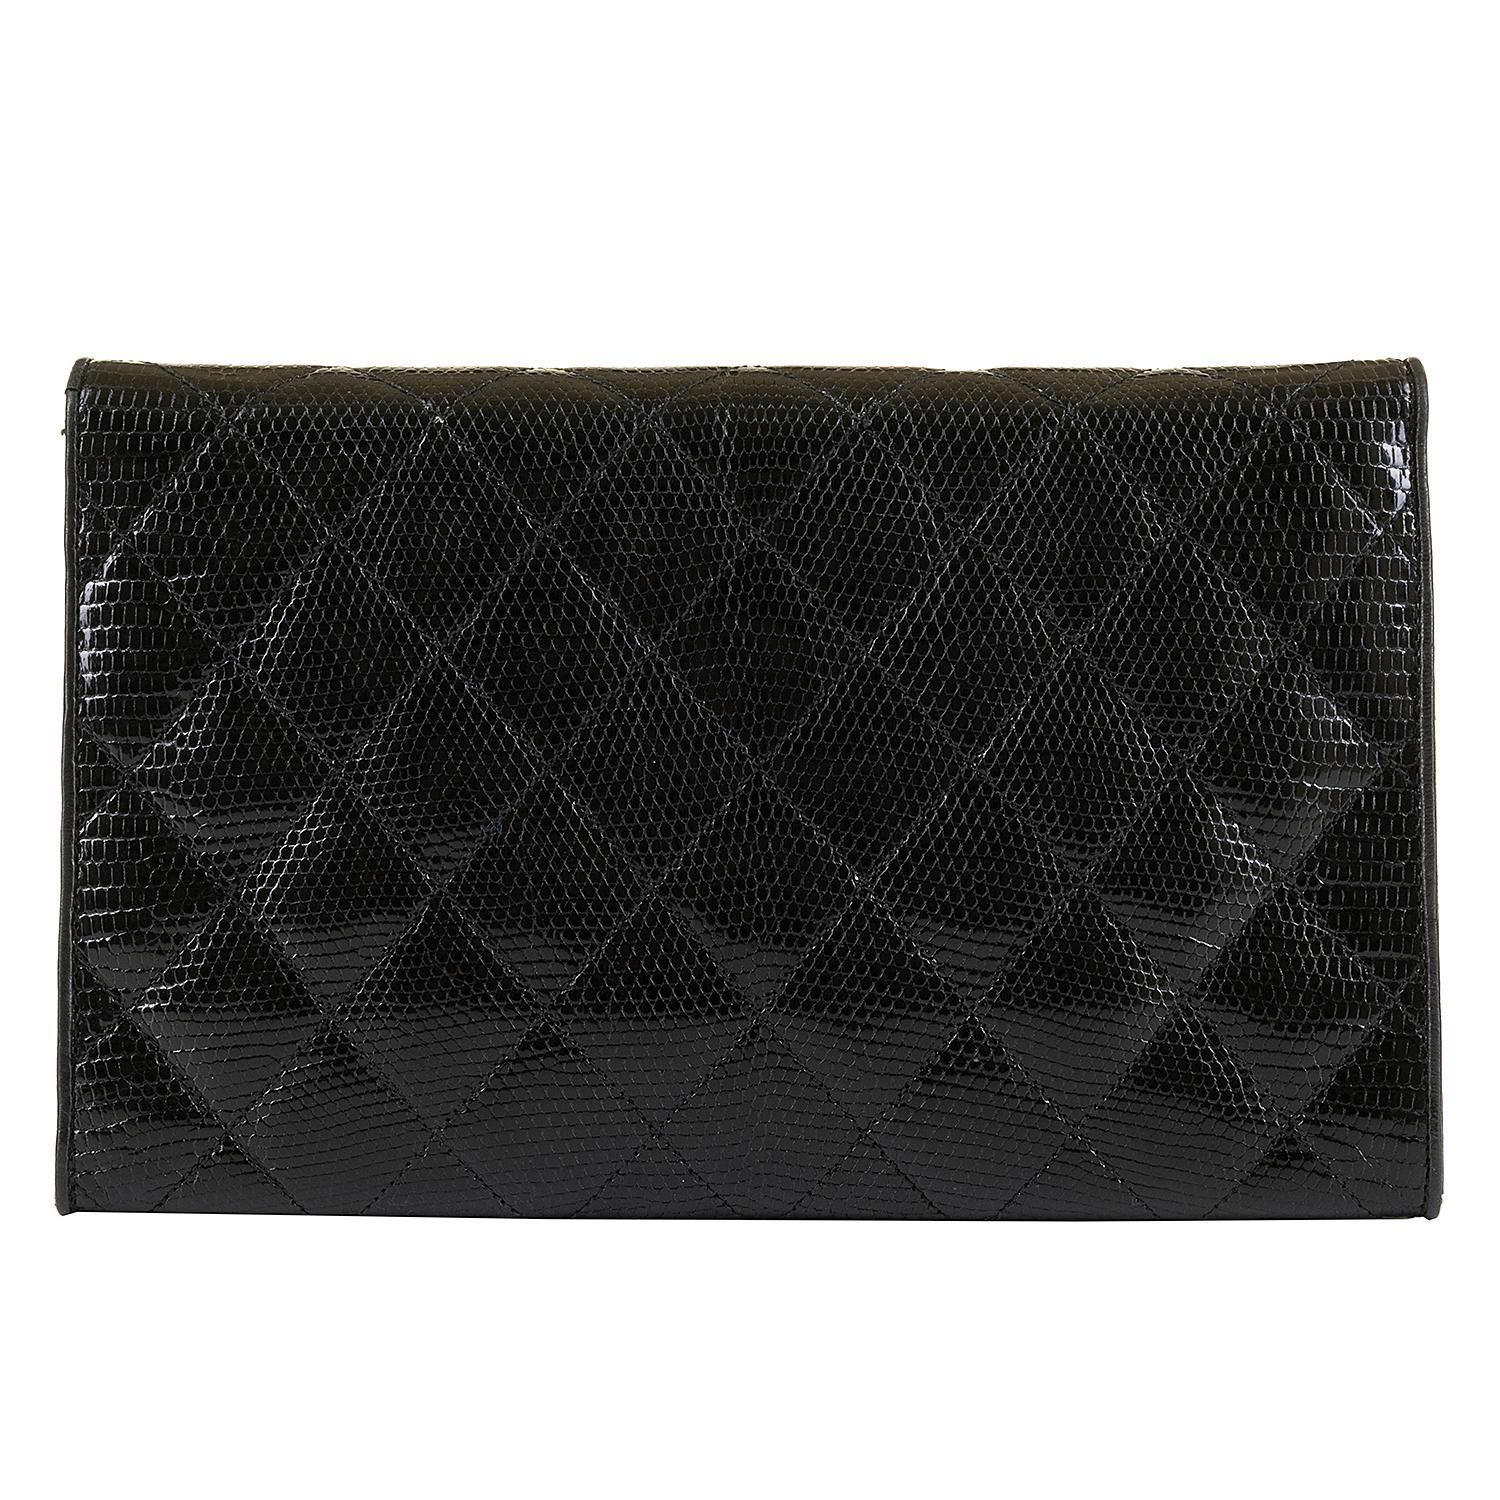 Rare Vintage Chanel Black Lizard Evening Bag by Karl Lagerfeld In Excellent Condition For Sale In London, GB